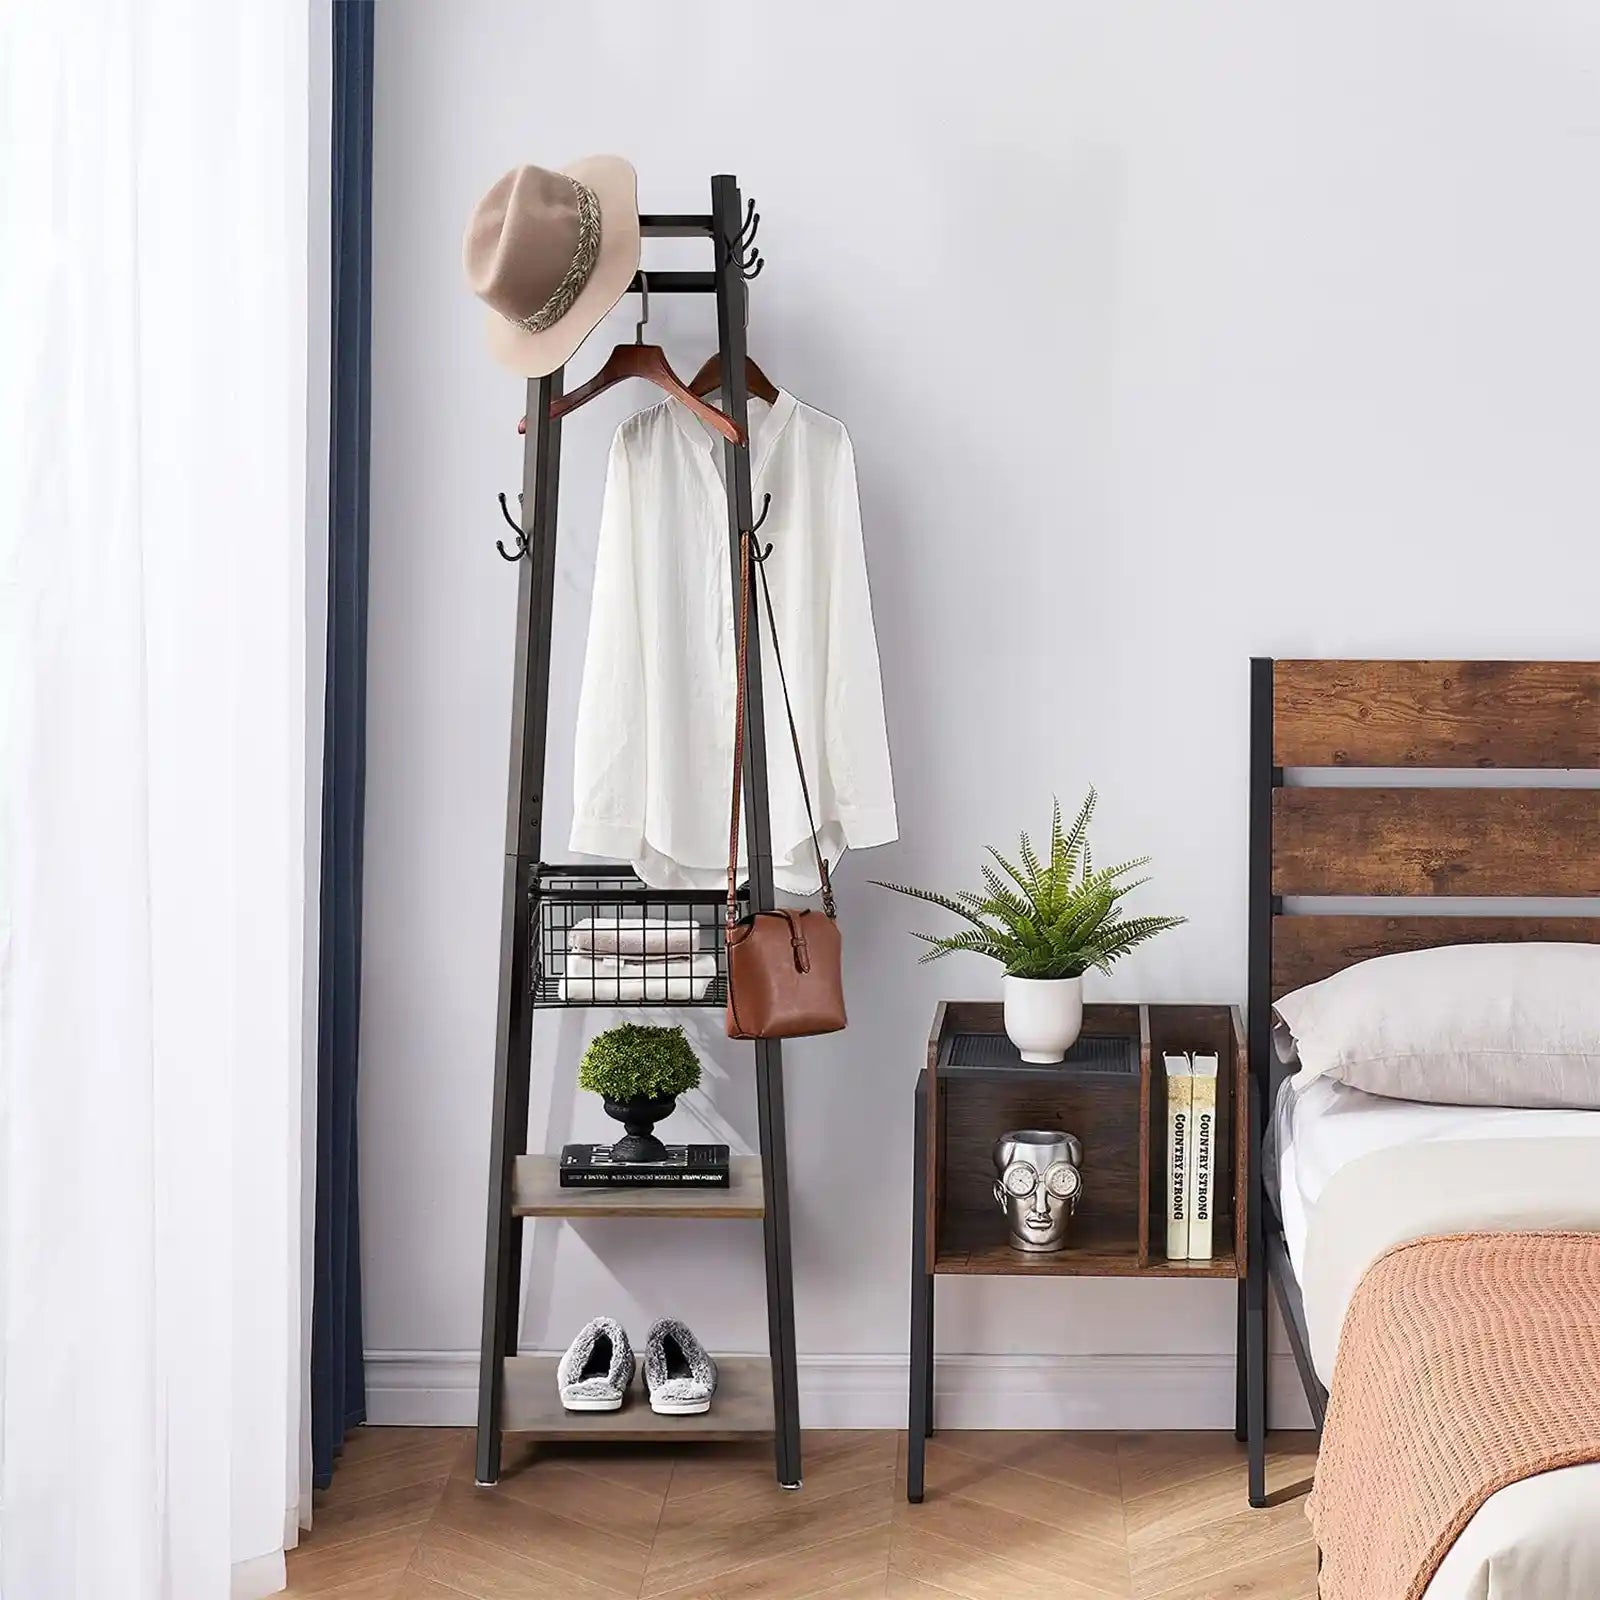 Industrial Coat Rack Stand, Hall Trees Freestanding, Entryway Clothes Stand with Metal Basket and 2 Shelves, Purse Hanger with 8 Dual Hooks/Stable Structure for Hats Bags and Scarves